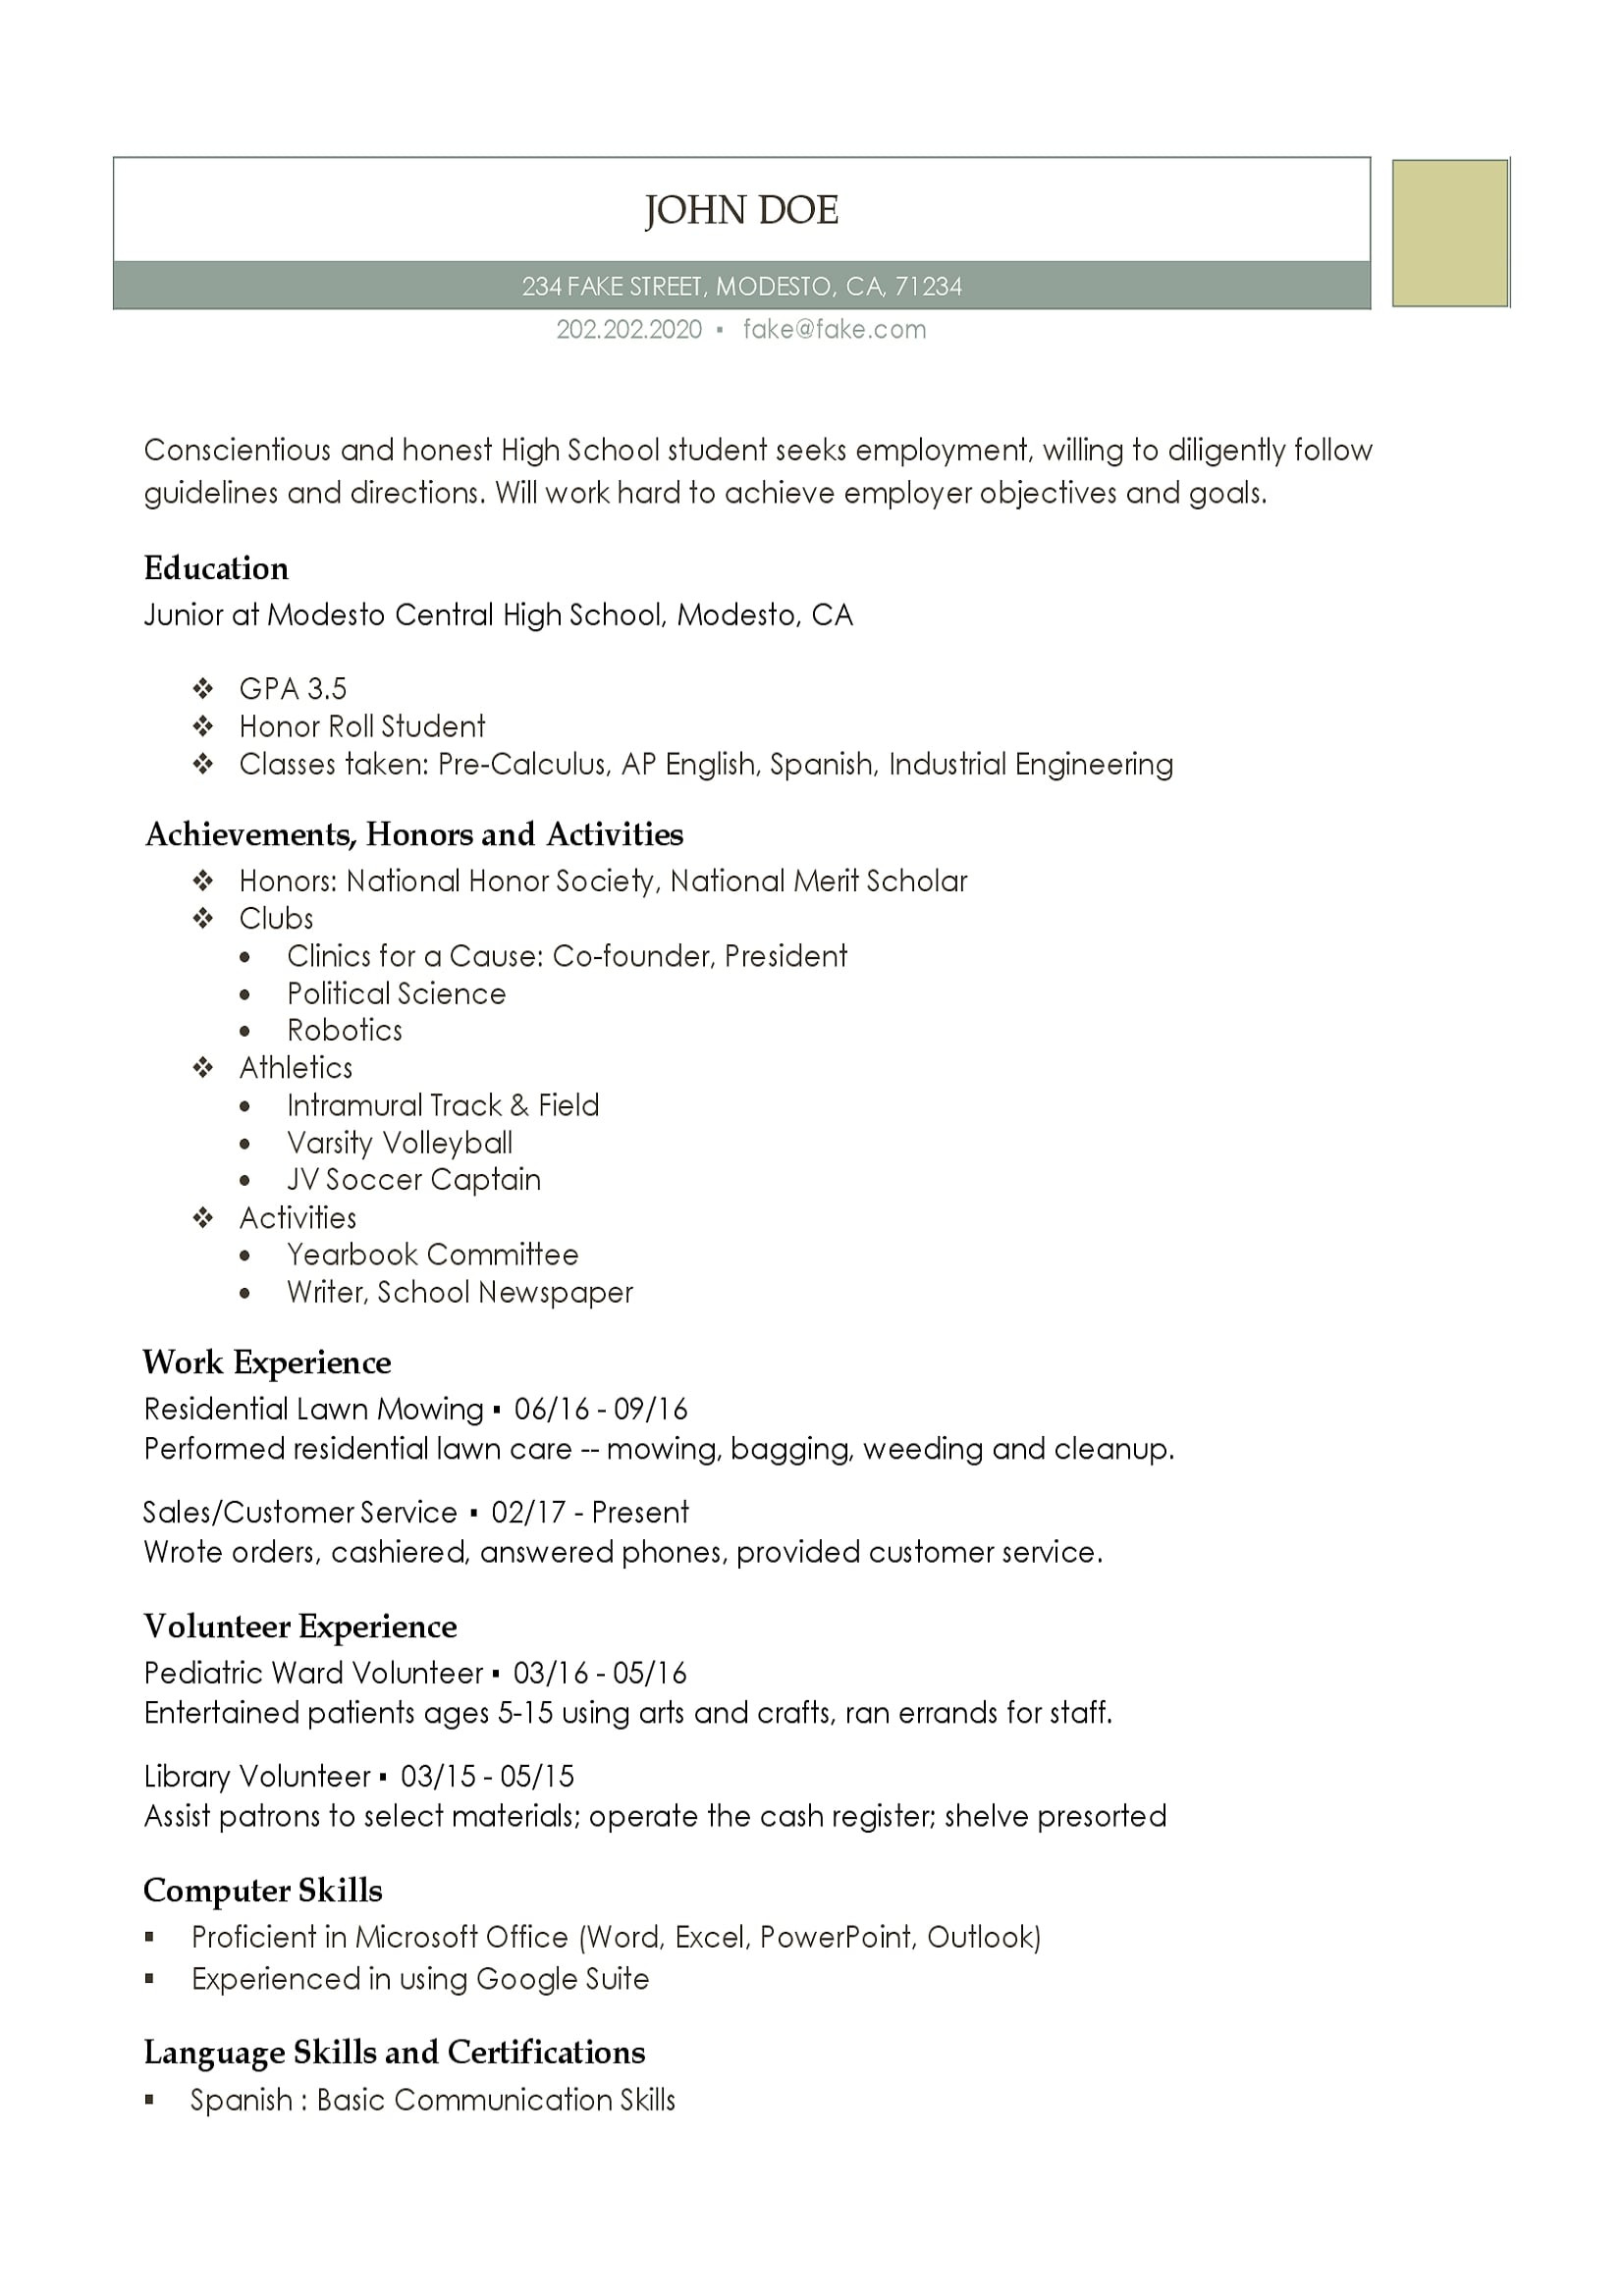 High School Student athlete Resume Sample High School Resume – Resume Templates for High School Students and …